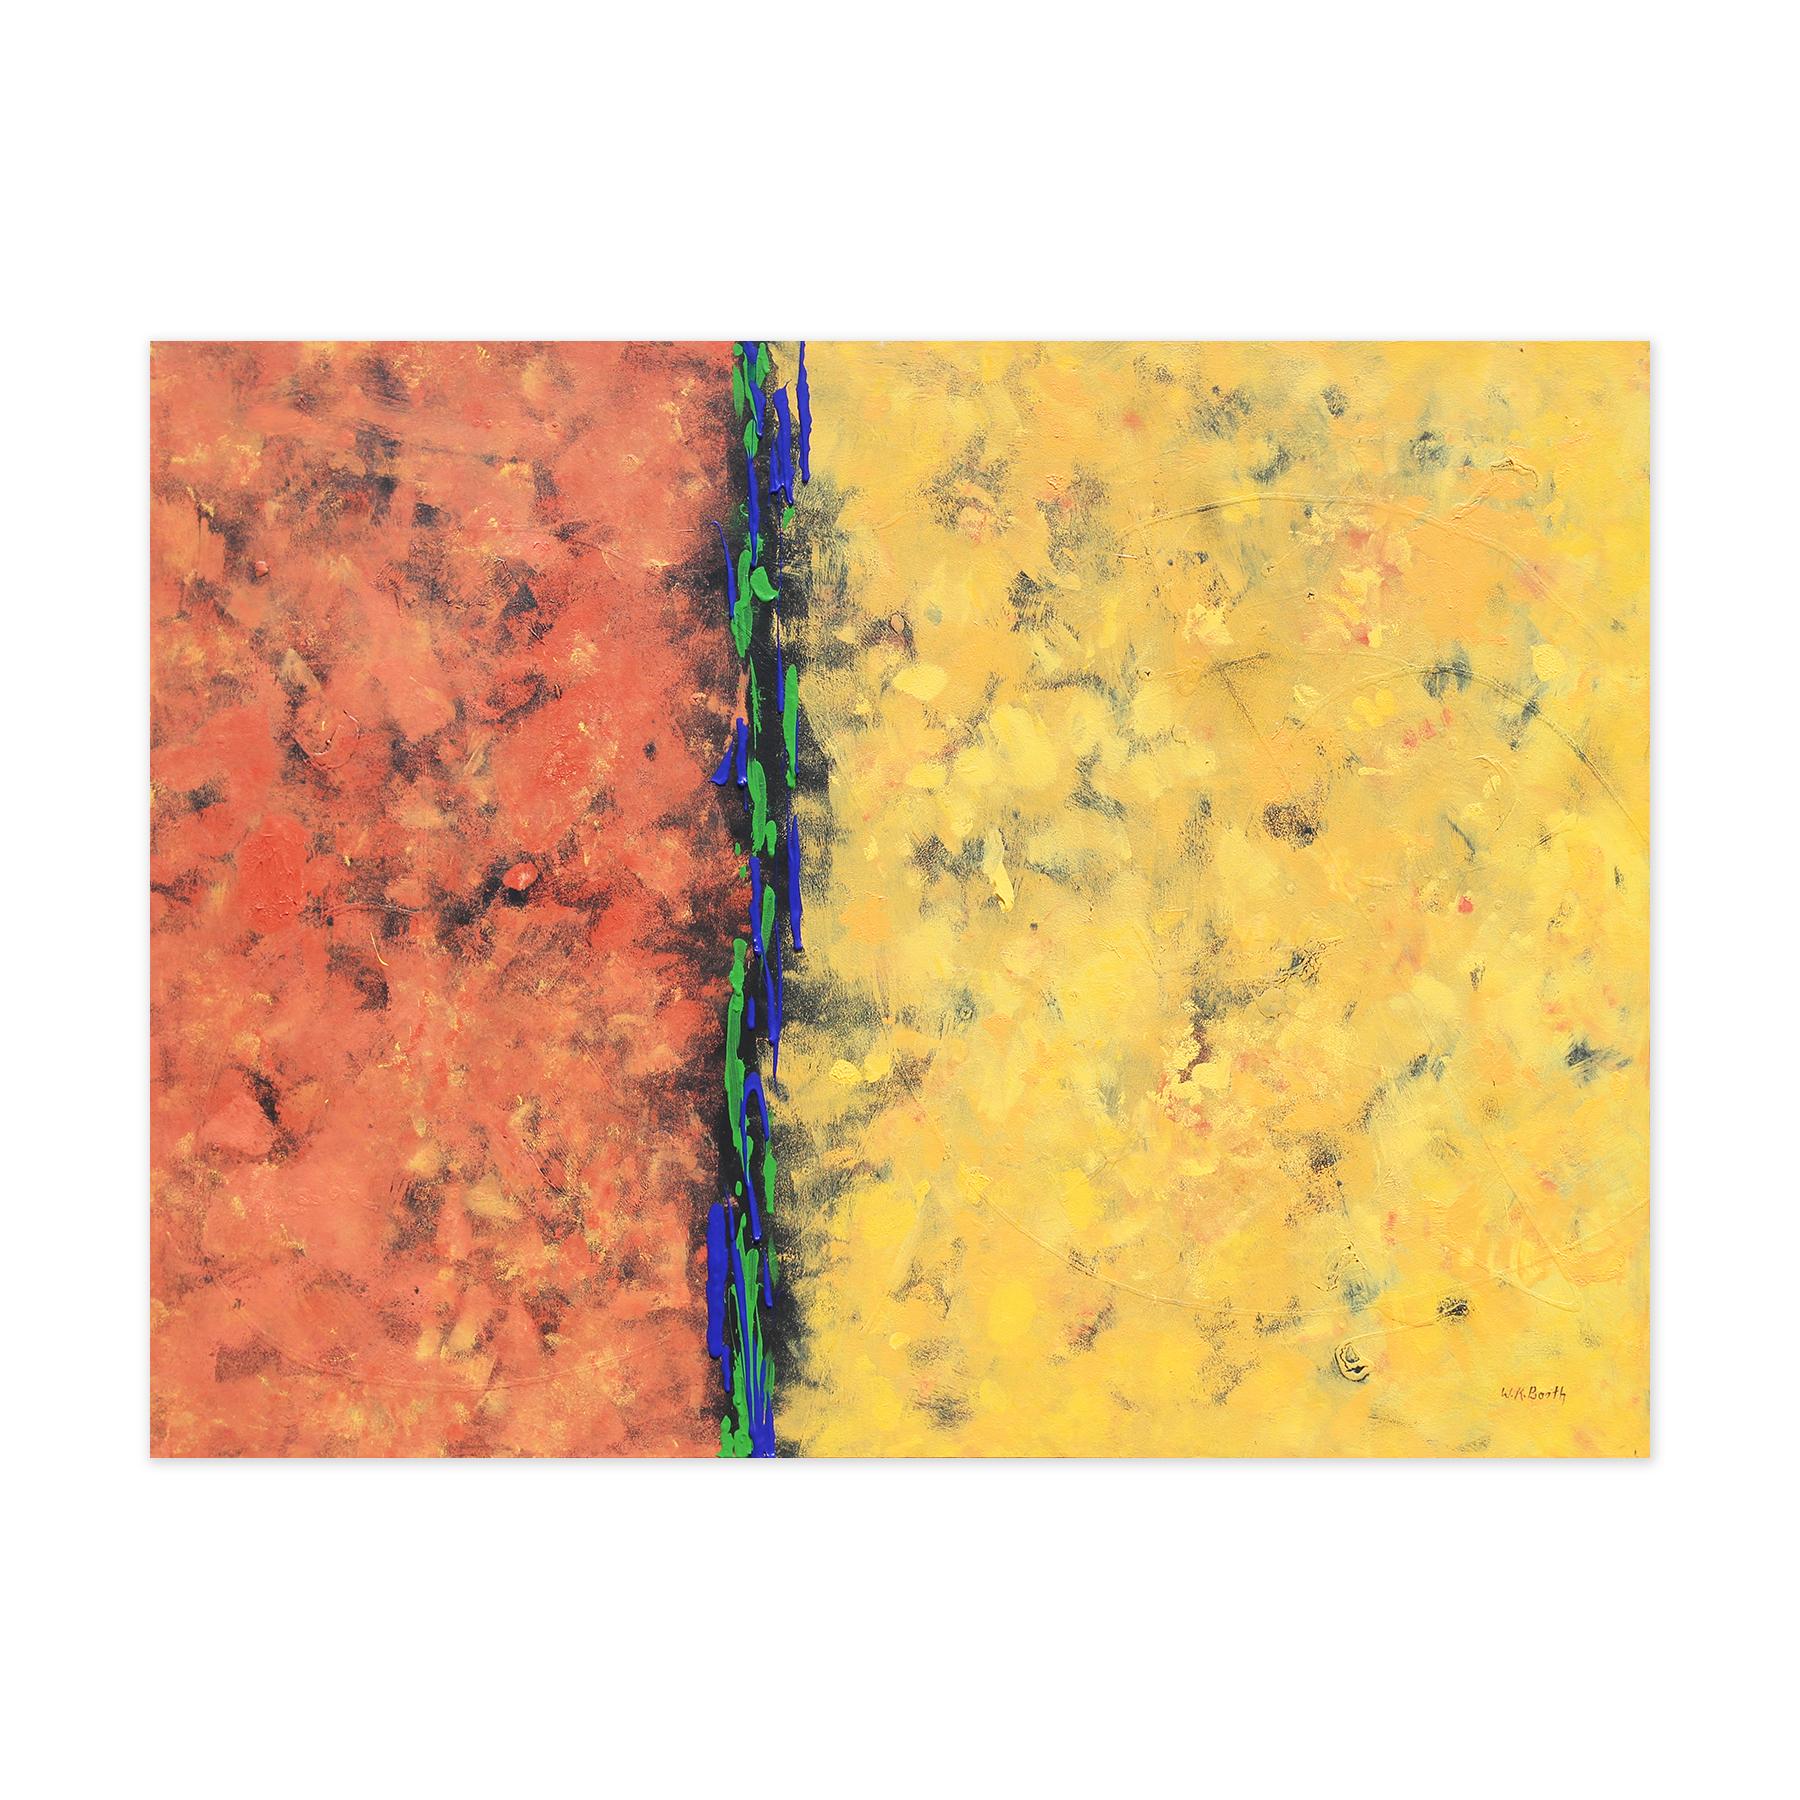 “Tectonic” Contemporary Red and Yellow Abstract Expressionist Painting - Orange Abstract Painting by Winifred Booth